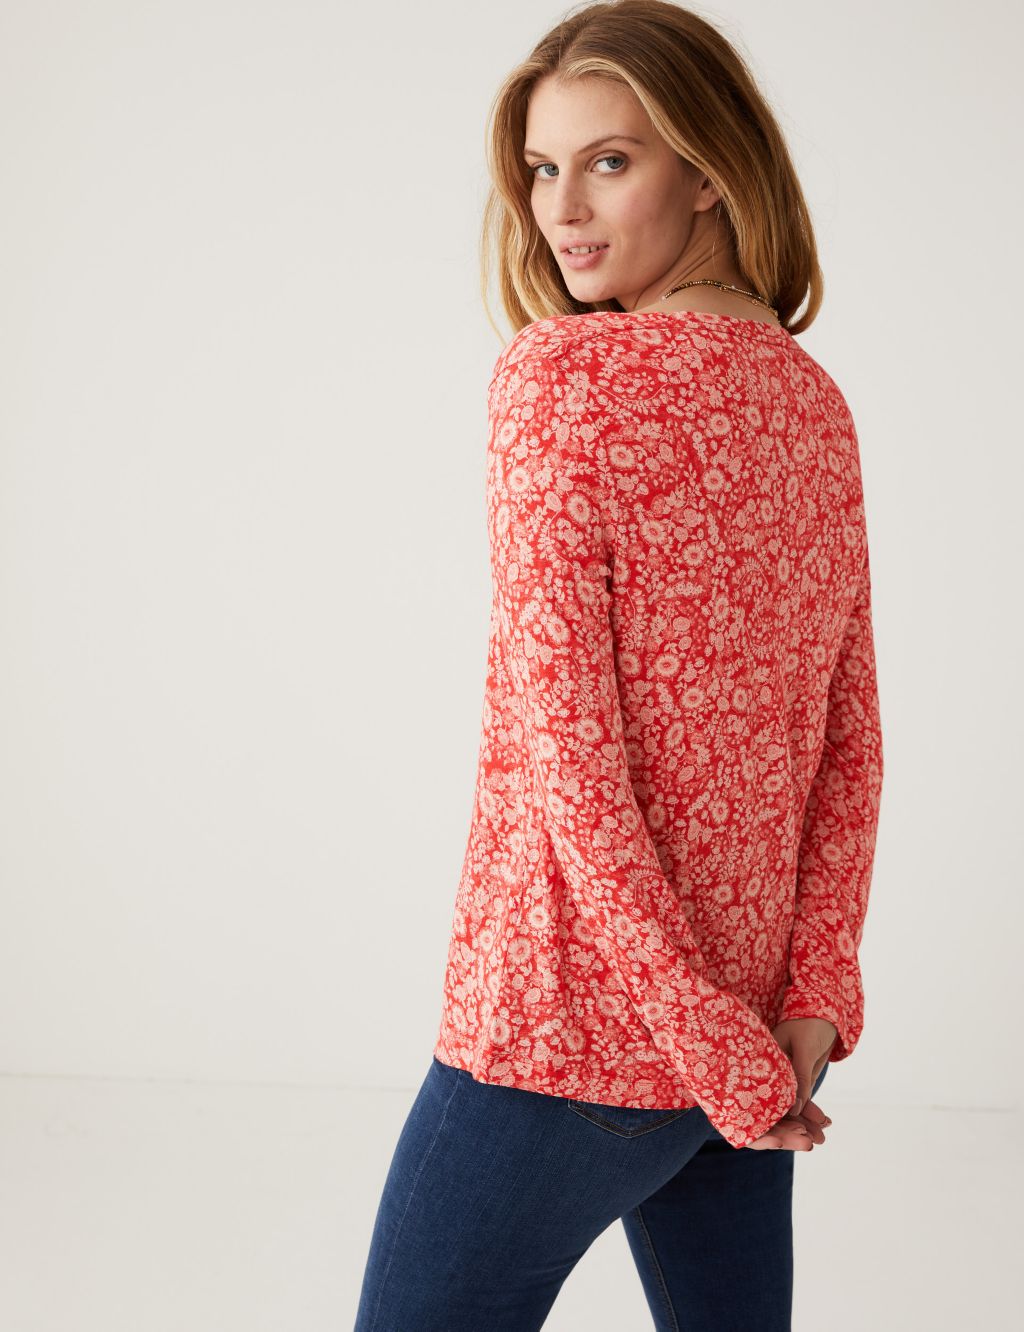 Linen Blend Printed Round Neck Top image 1